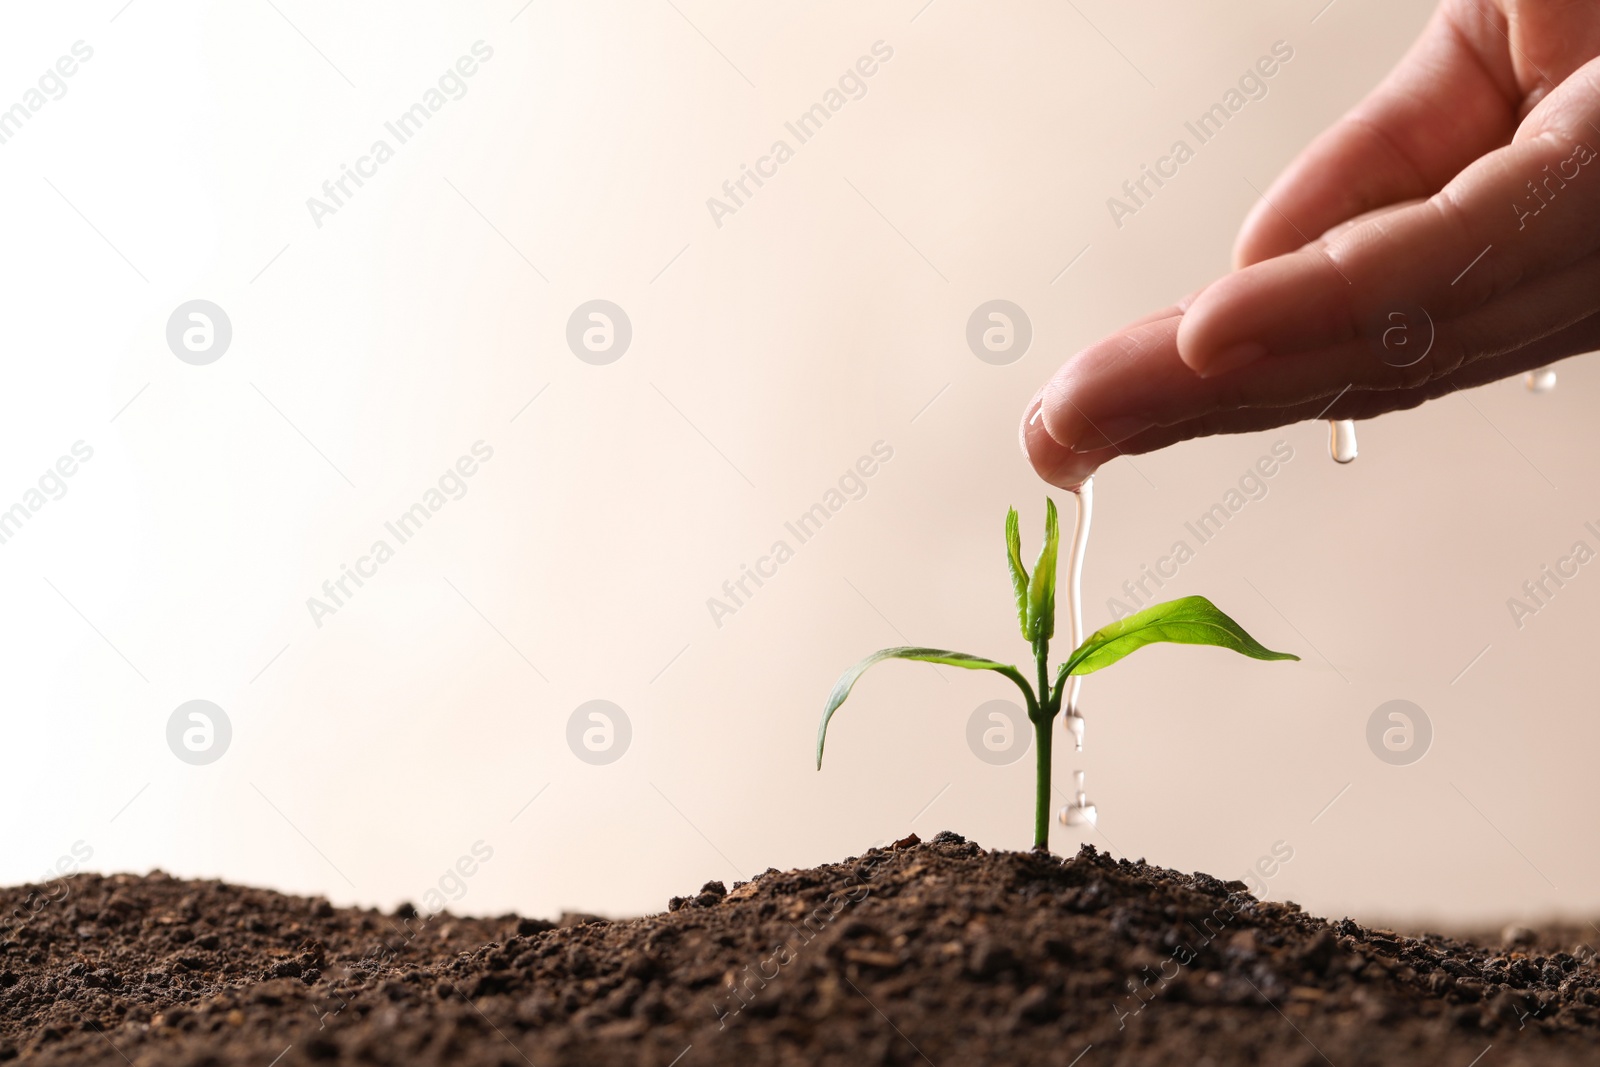 Photo of Woman pouring water on young seedling in soil against light background, closeup